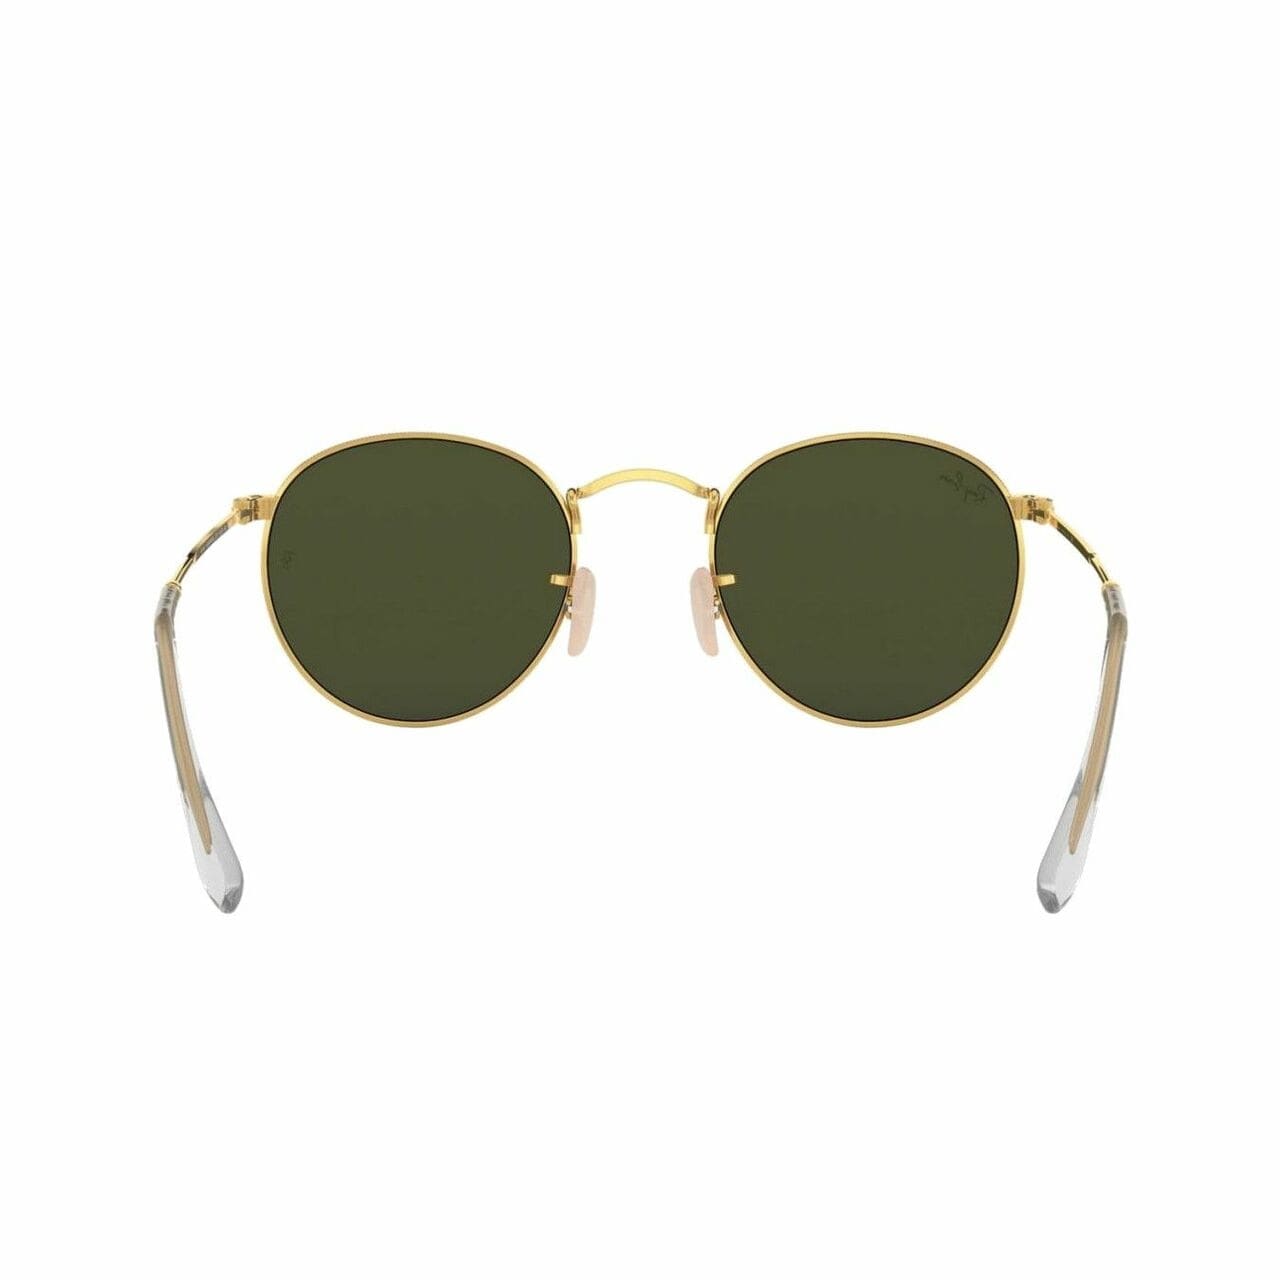 Ray-Ban RB3447-001 Round Metal Polished Gold Metal Green Classic G-15 Lens Sunglasses 805289439899